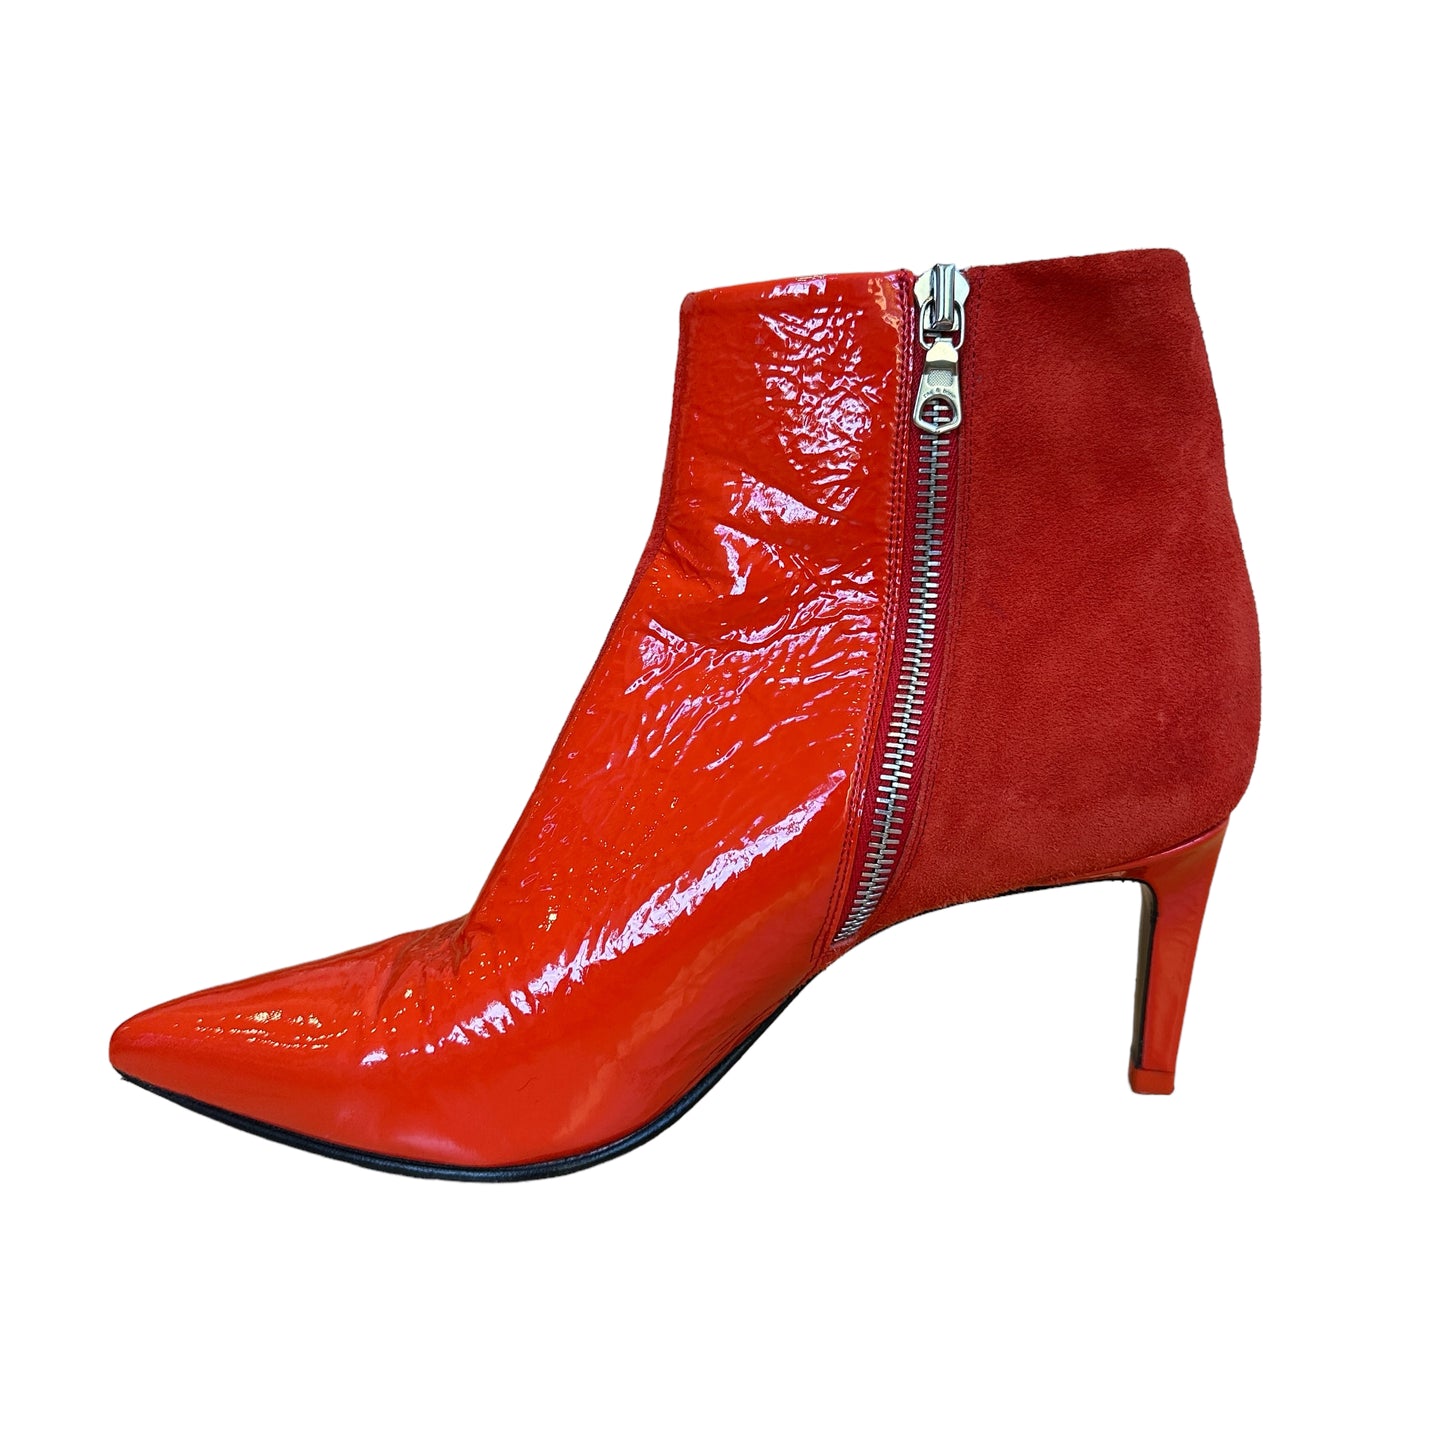 LipStick Red Boots - 7.5